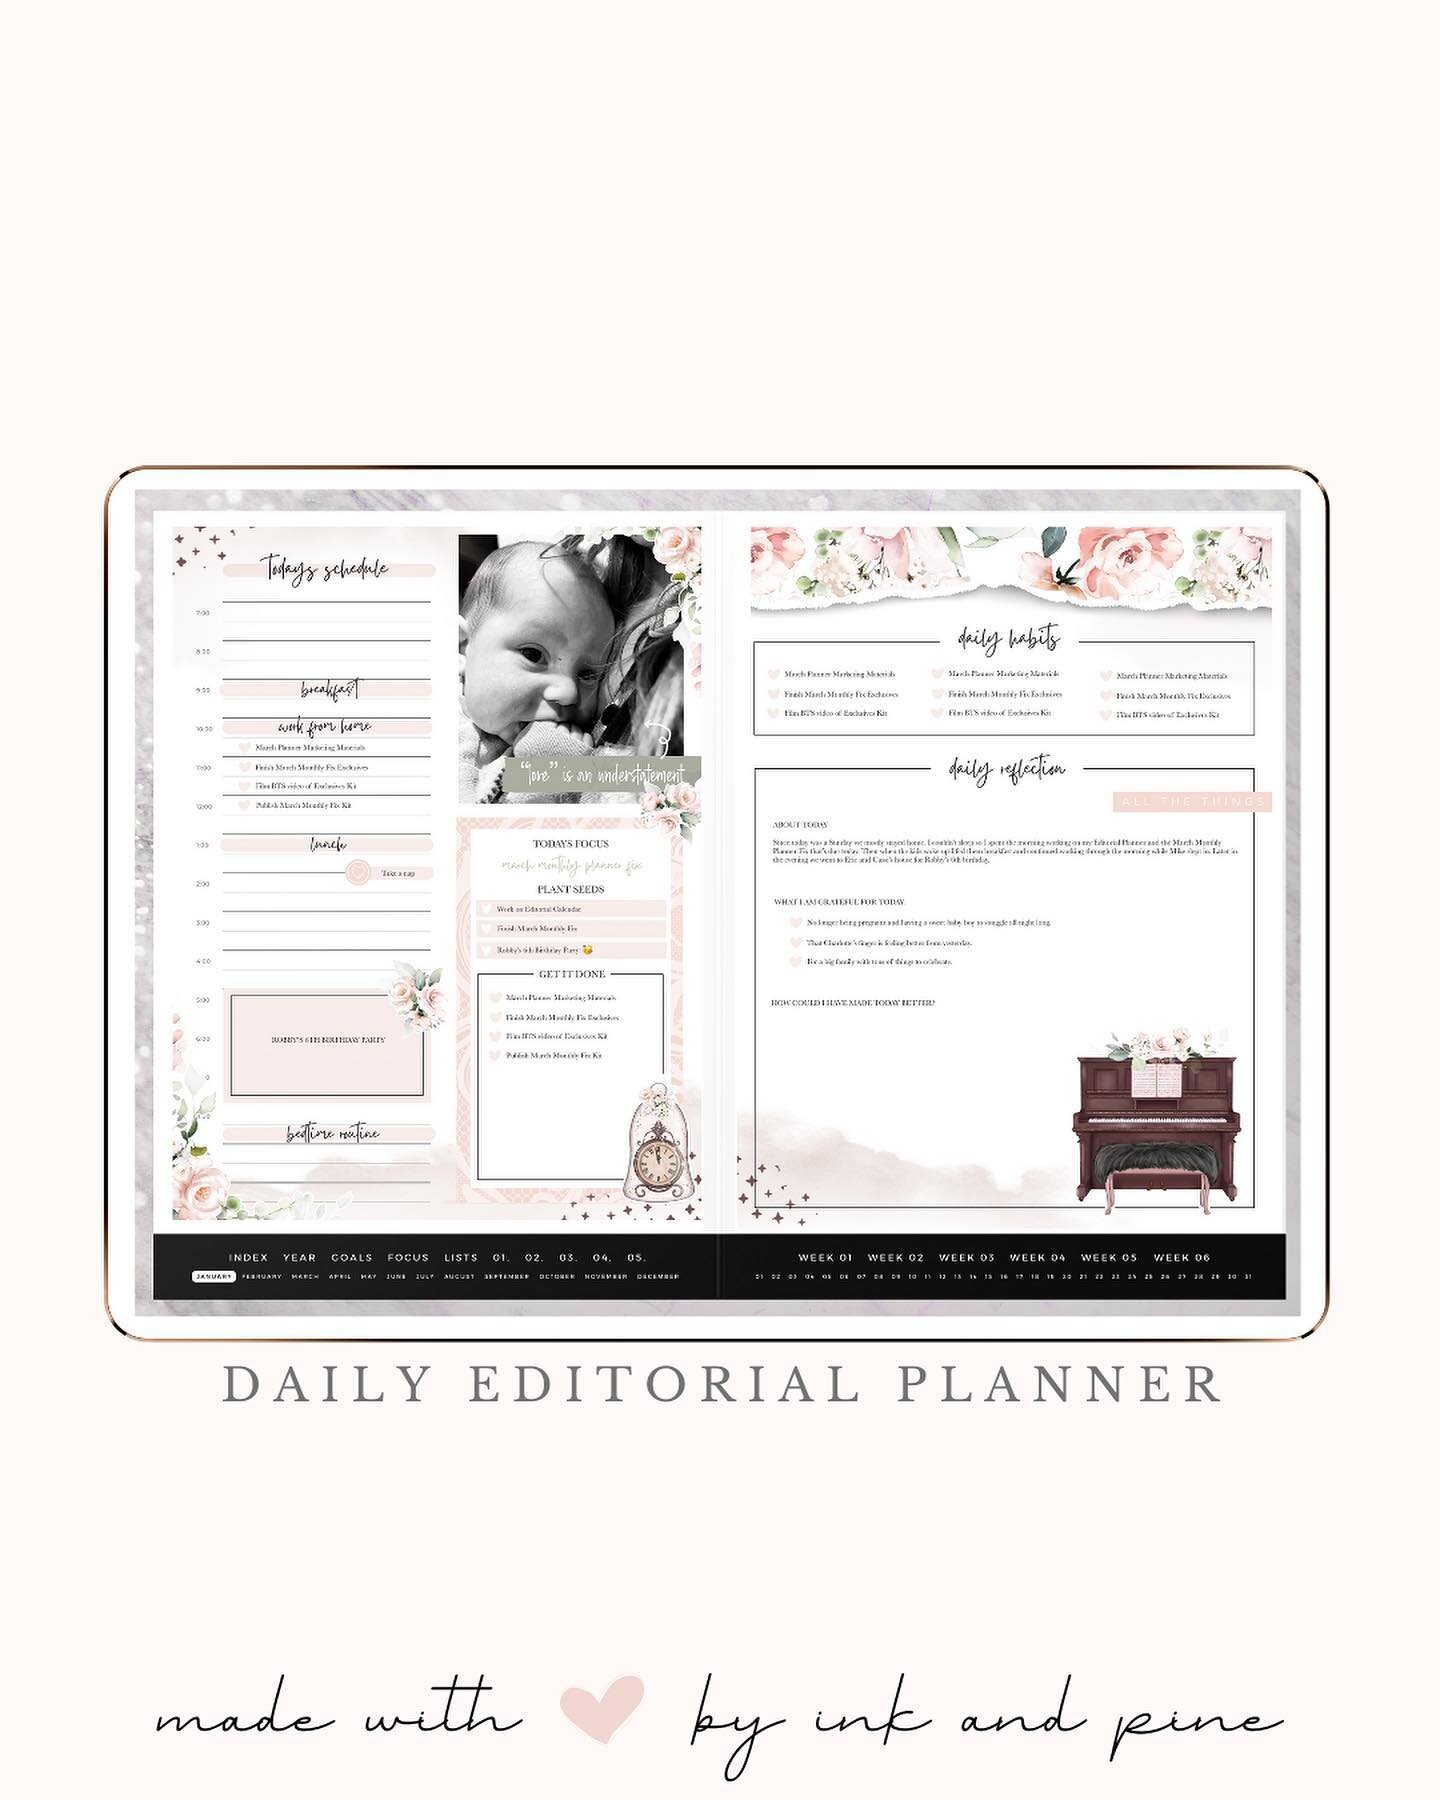 I have some exciting news! First, the pink version of the Lifestyle Planner is almost finished... I'm just wrapping up the final touches and finishing up assembling the templates goodnotes file.

But also, I've created a completely new planner! The E